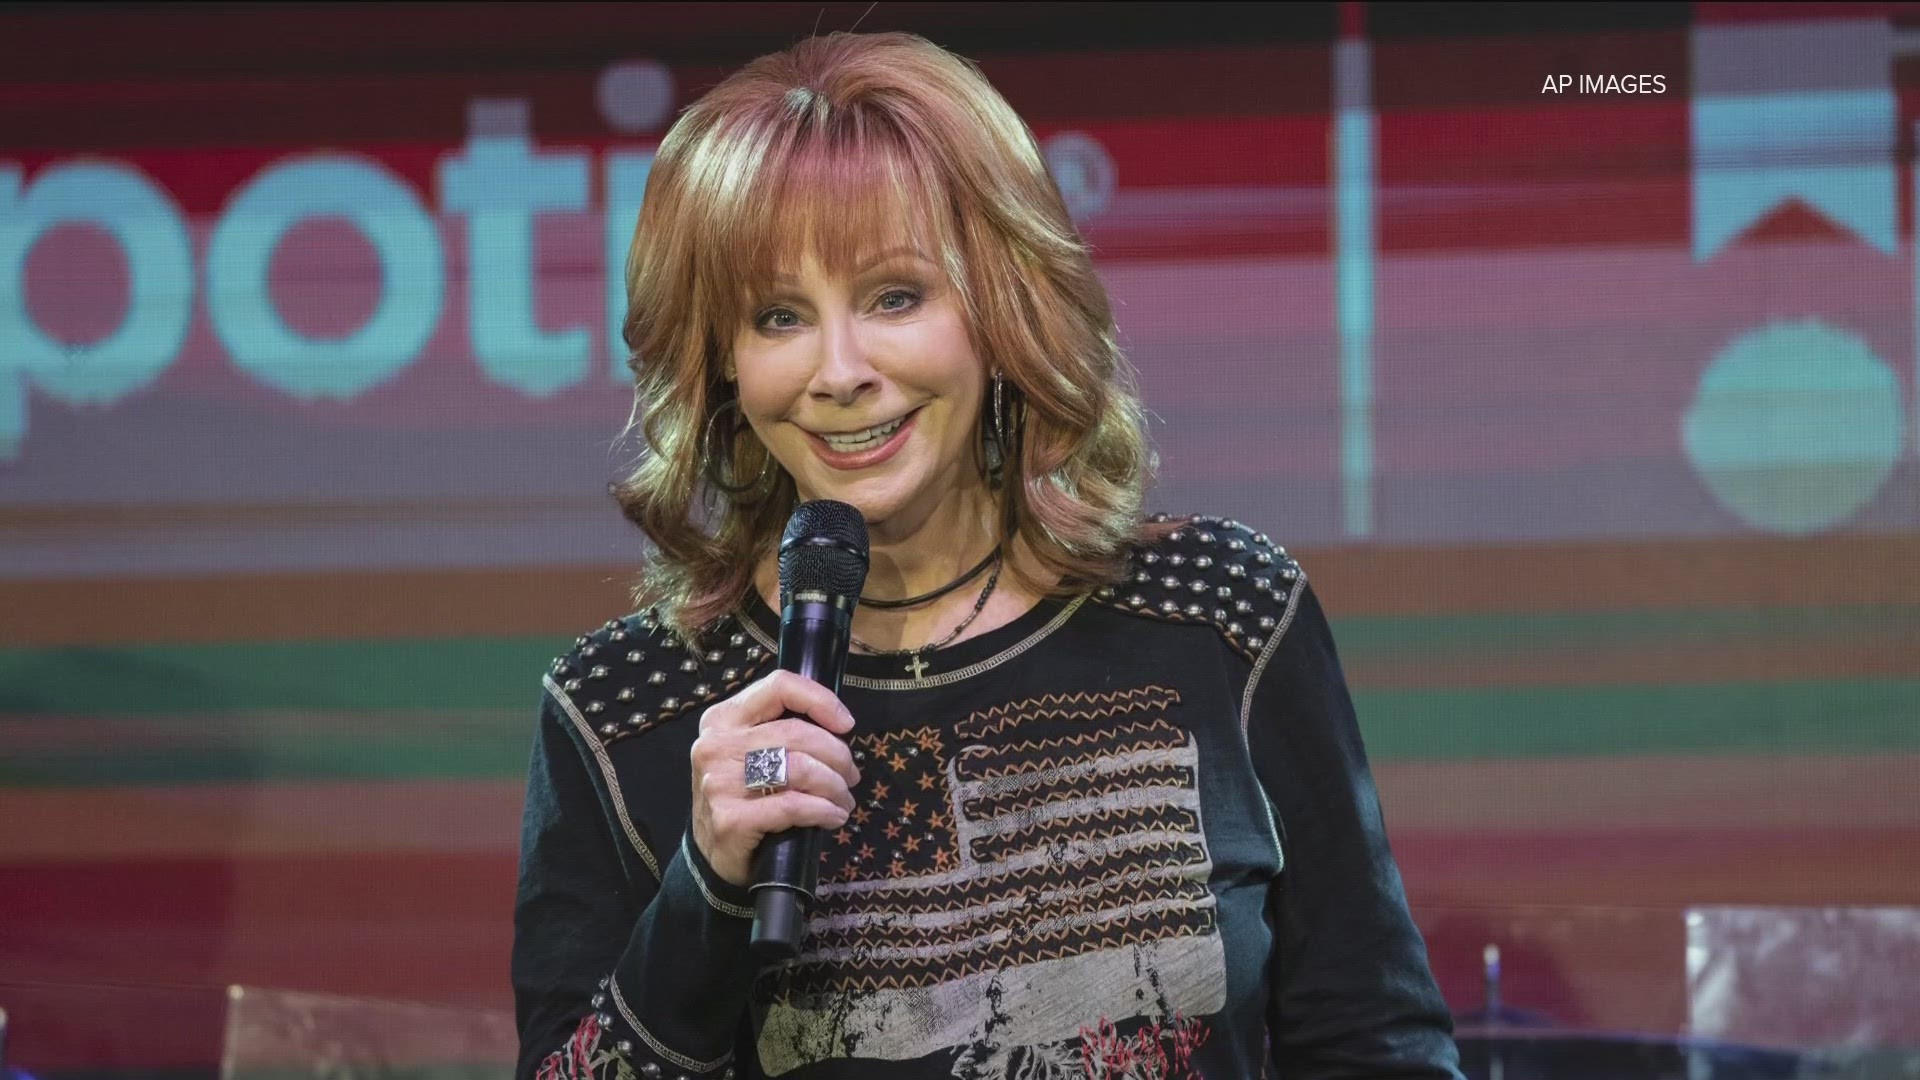 Country music icon Reba McEntire will sing the national anthem before the big game.